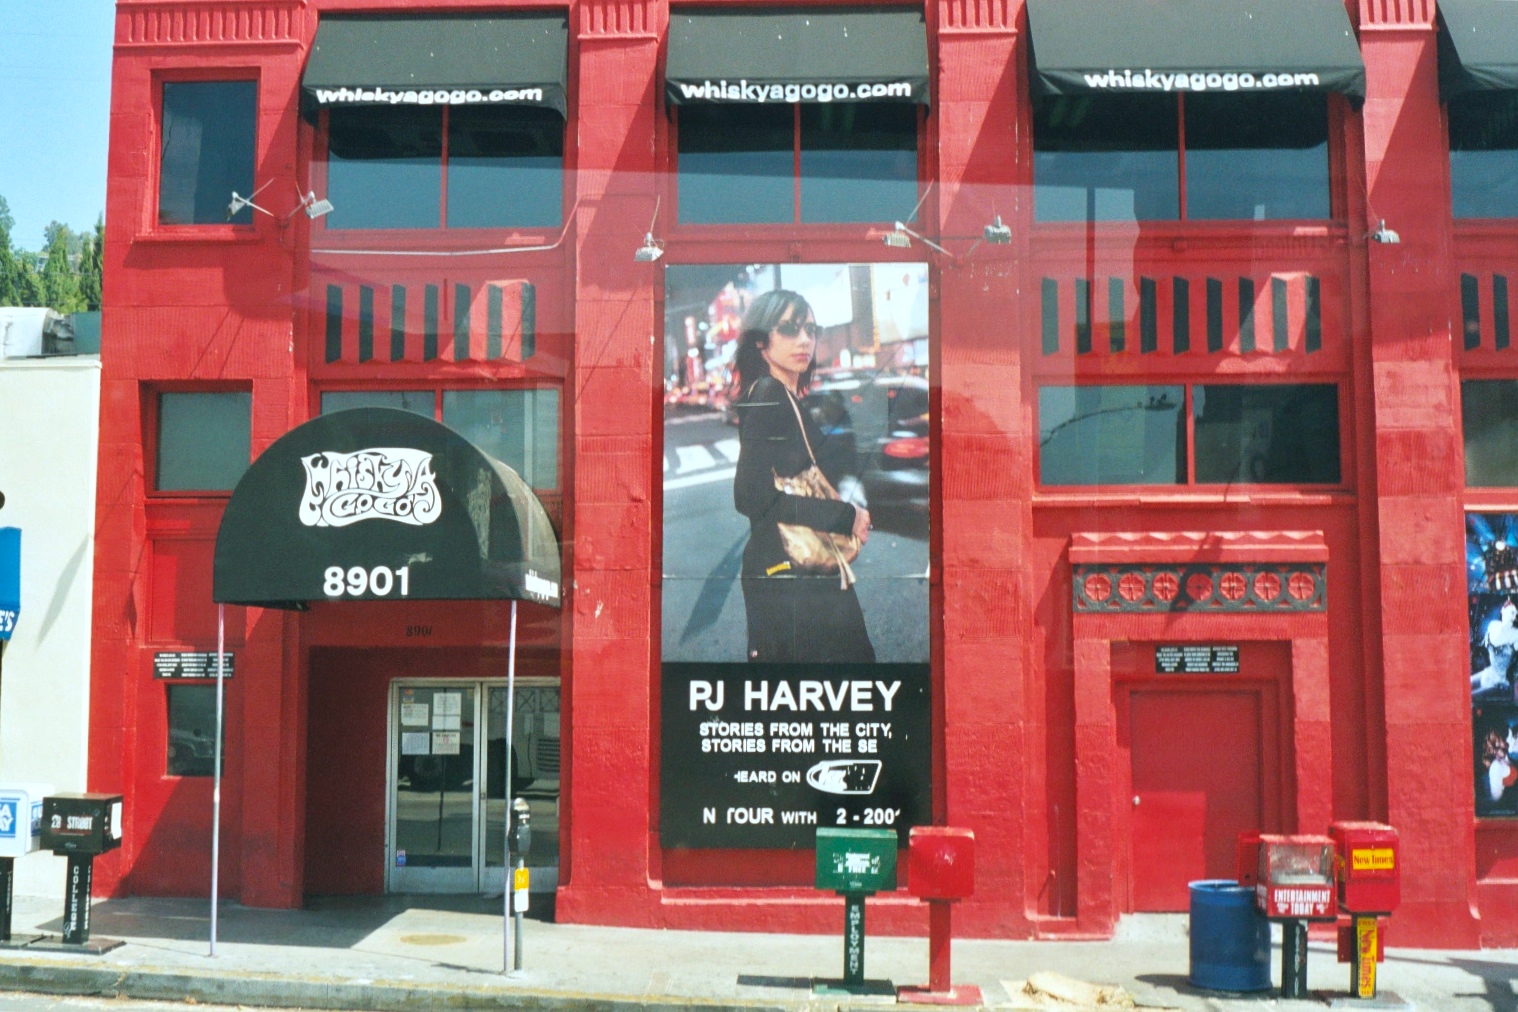 The bright red fascia of the Whiskey A-Go-Go in Los Angeles, with a huge PJ Harvey poster.